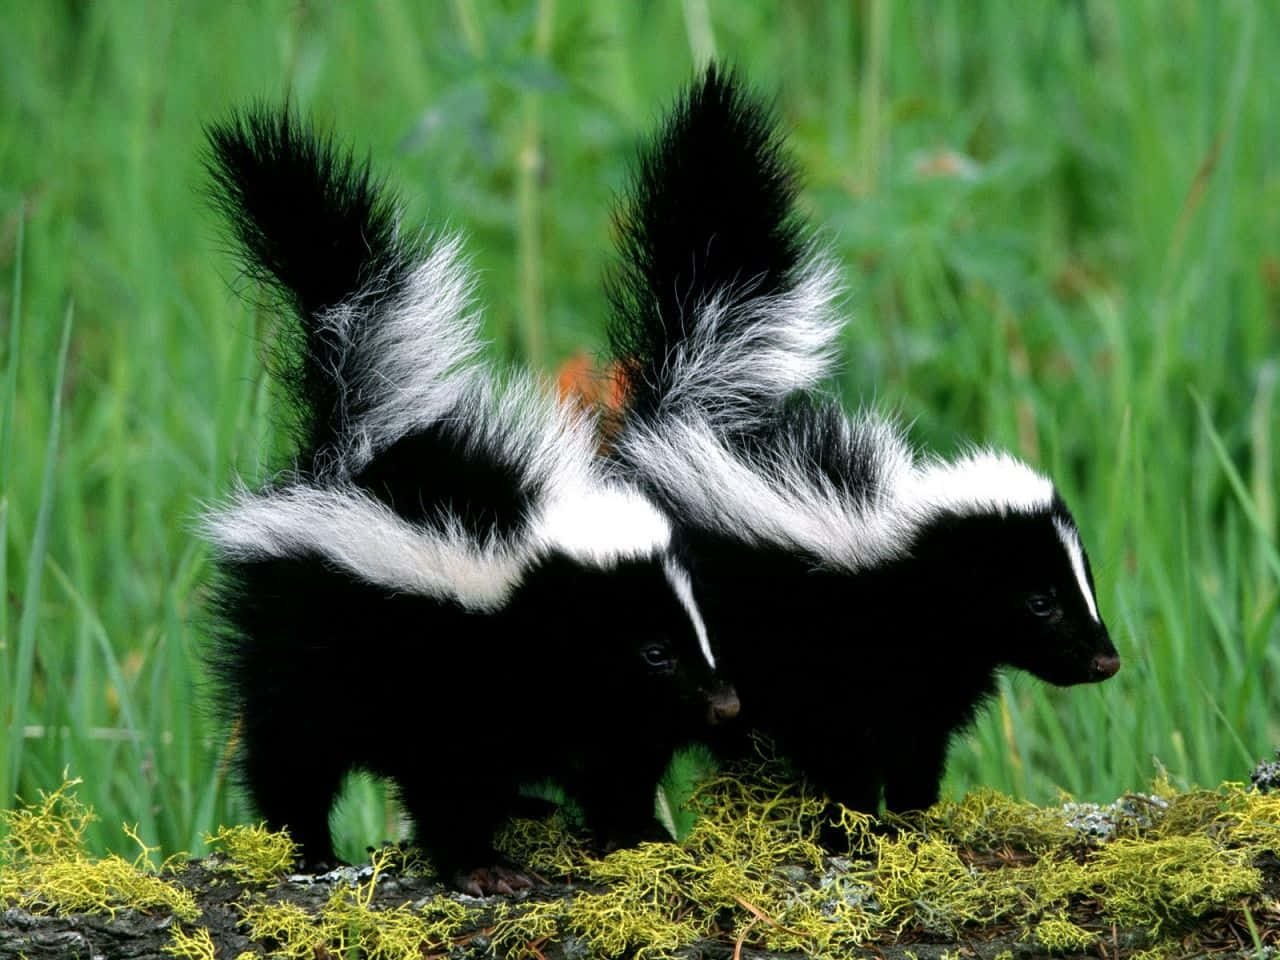 Two Skunks Standing On A Log In The Grass